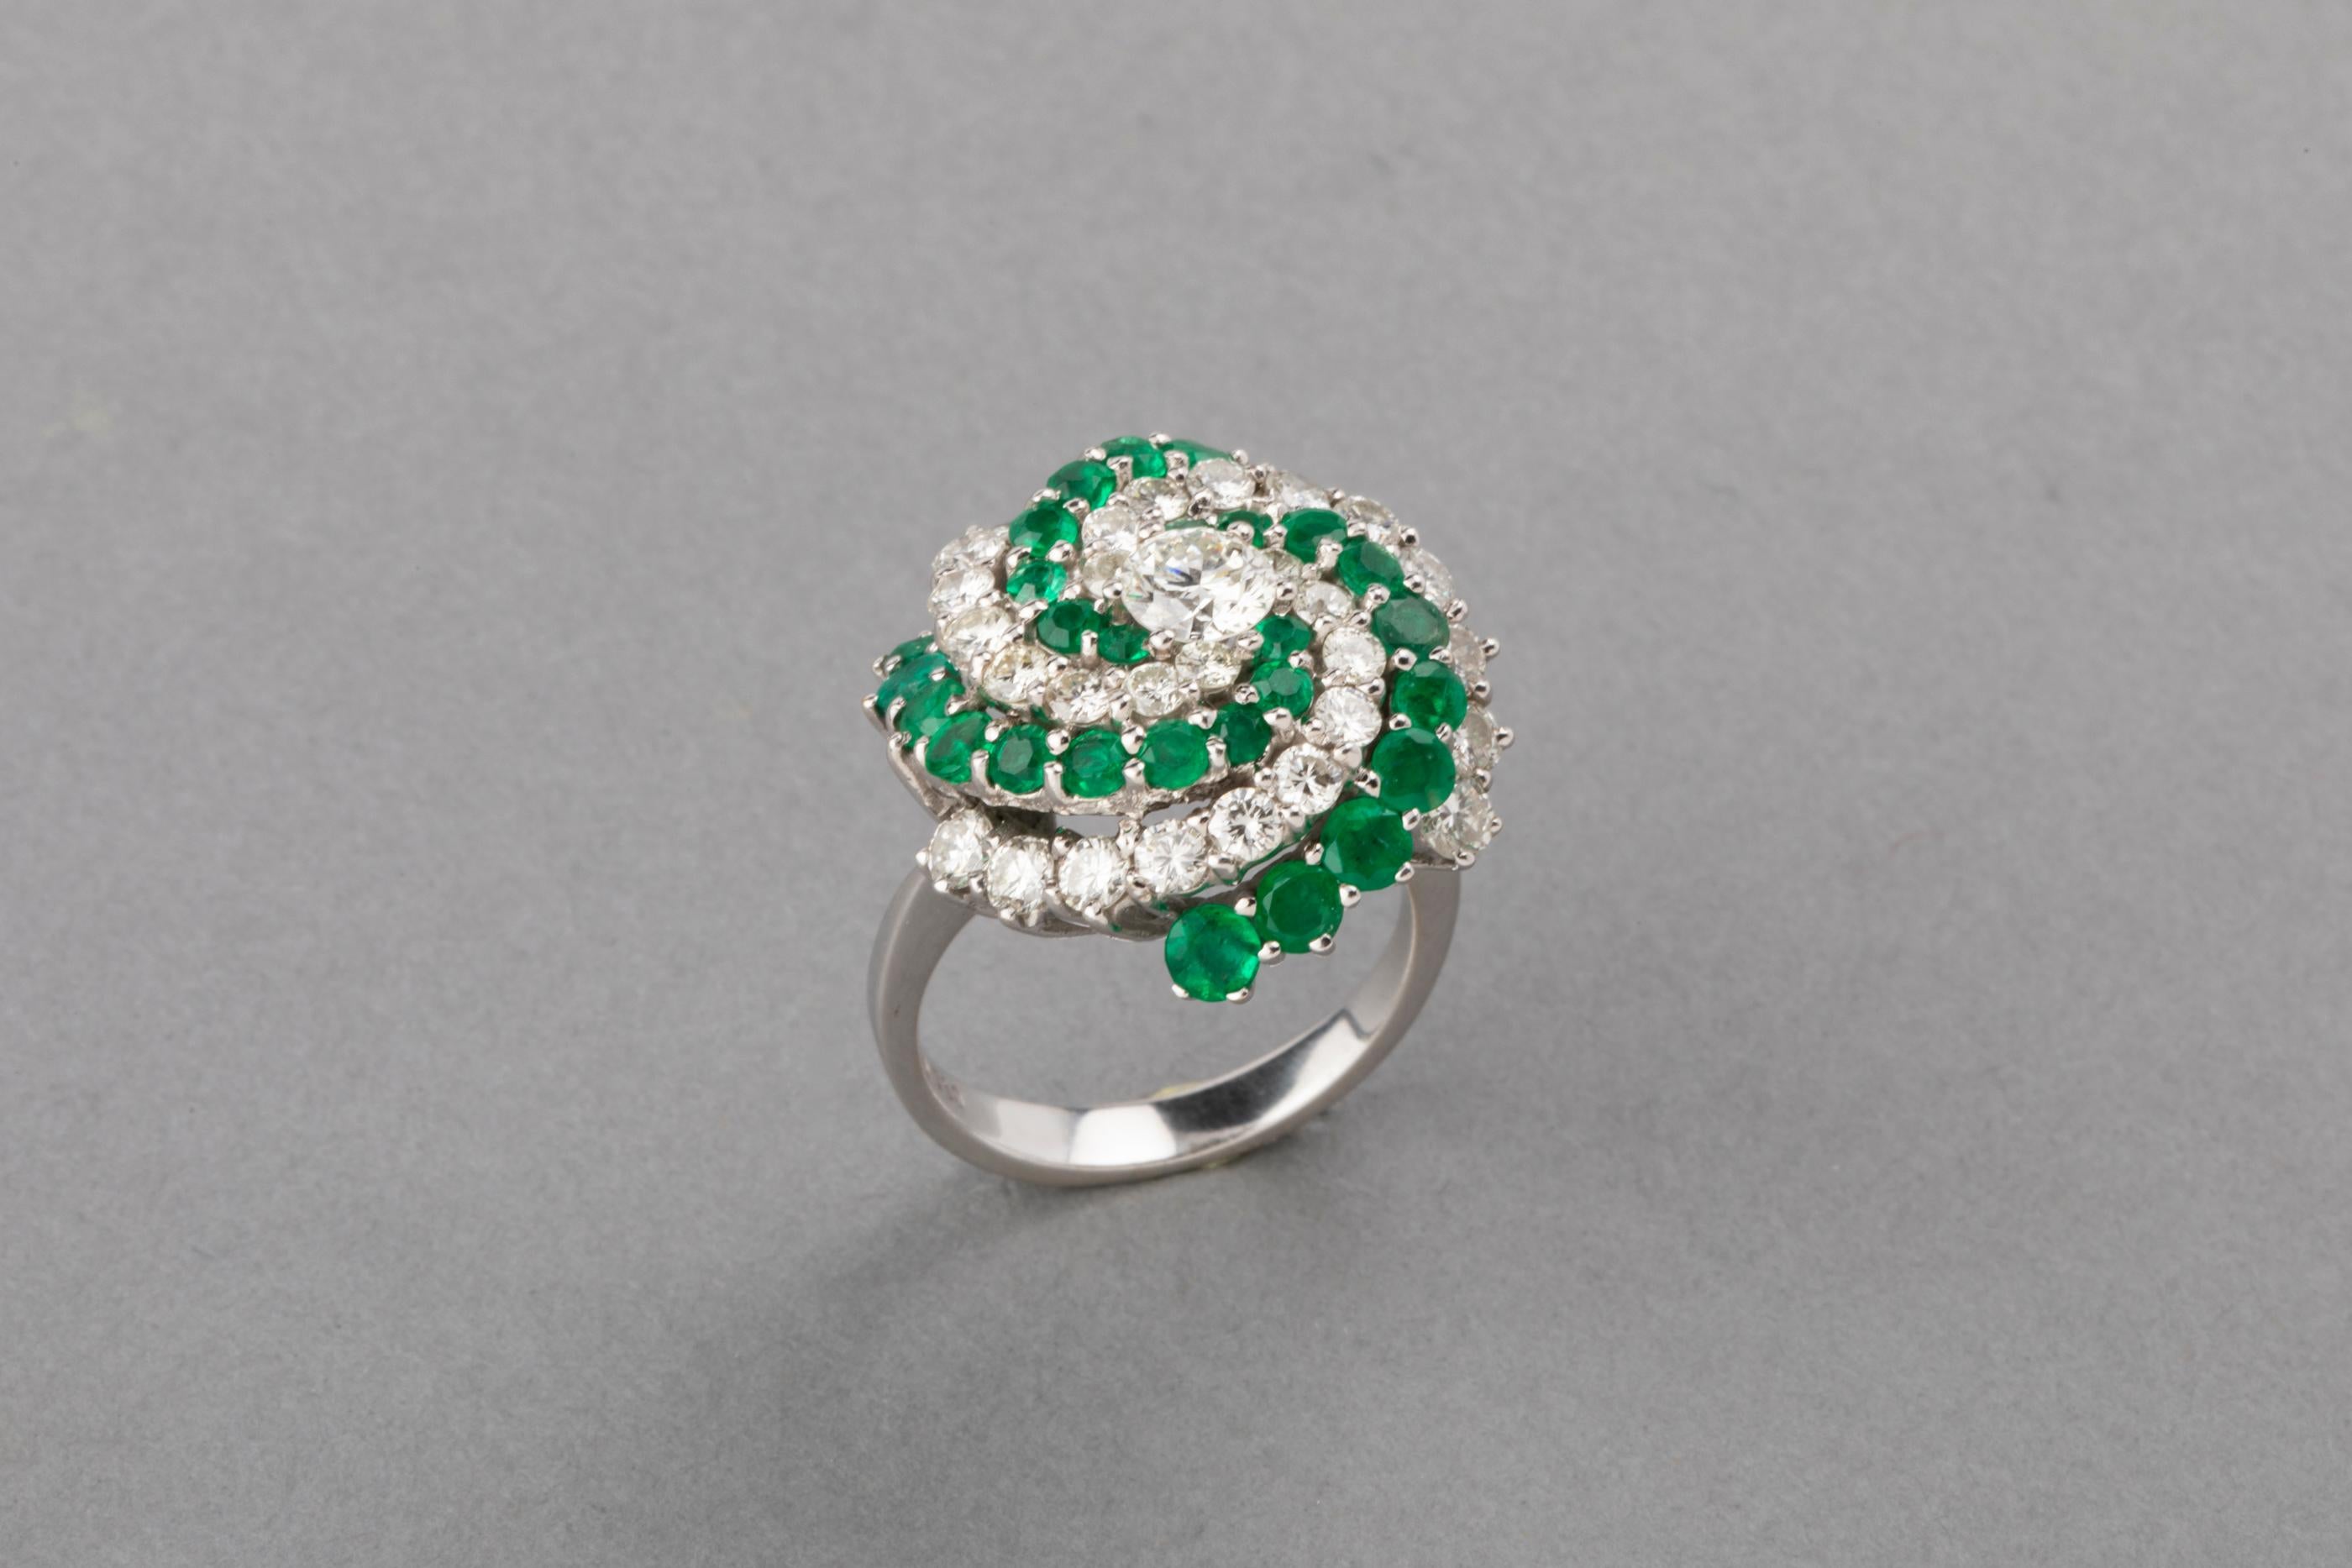 5 Carats Diamonds and 4 Carats Emeralds Set

Very beautiful set. 
Made in white golf 18k, marks fort gold 750.
The total weight of diamonds is 5 carats. For the ring the bigger one is 0.50 carats, the others weight 1.50 estimate. For the earrings